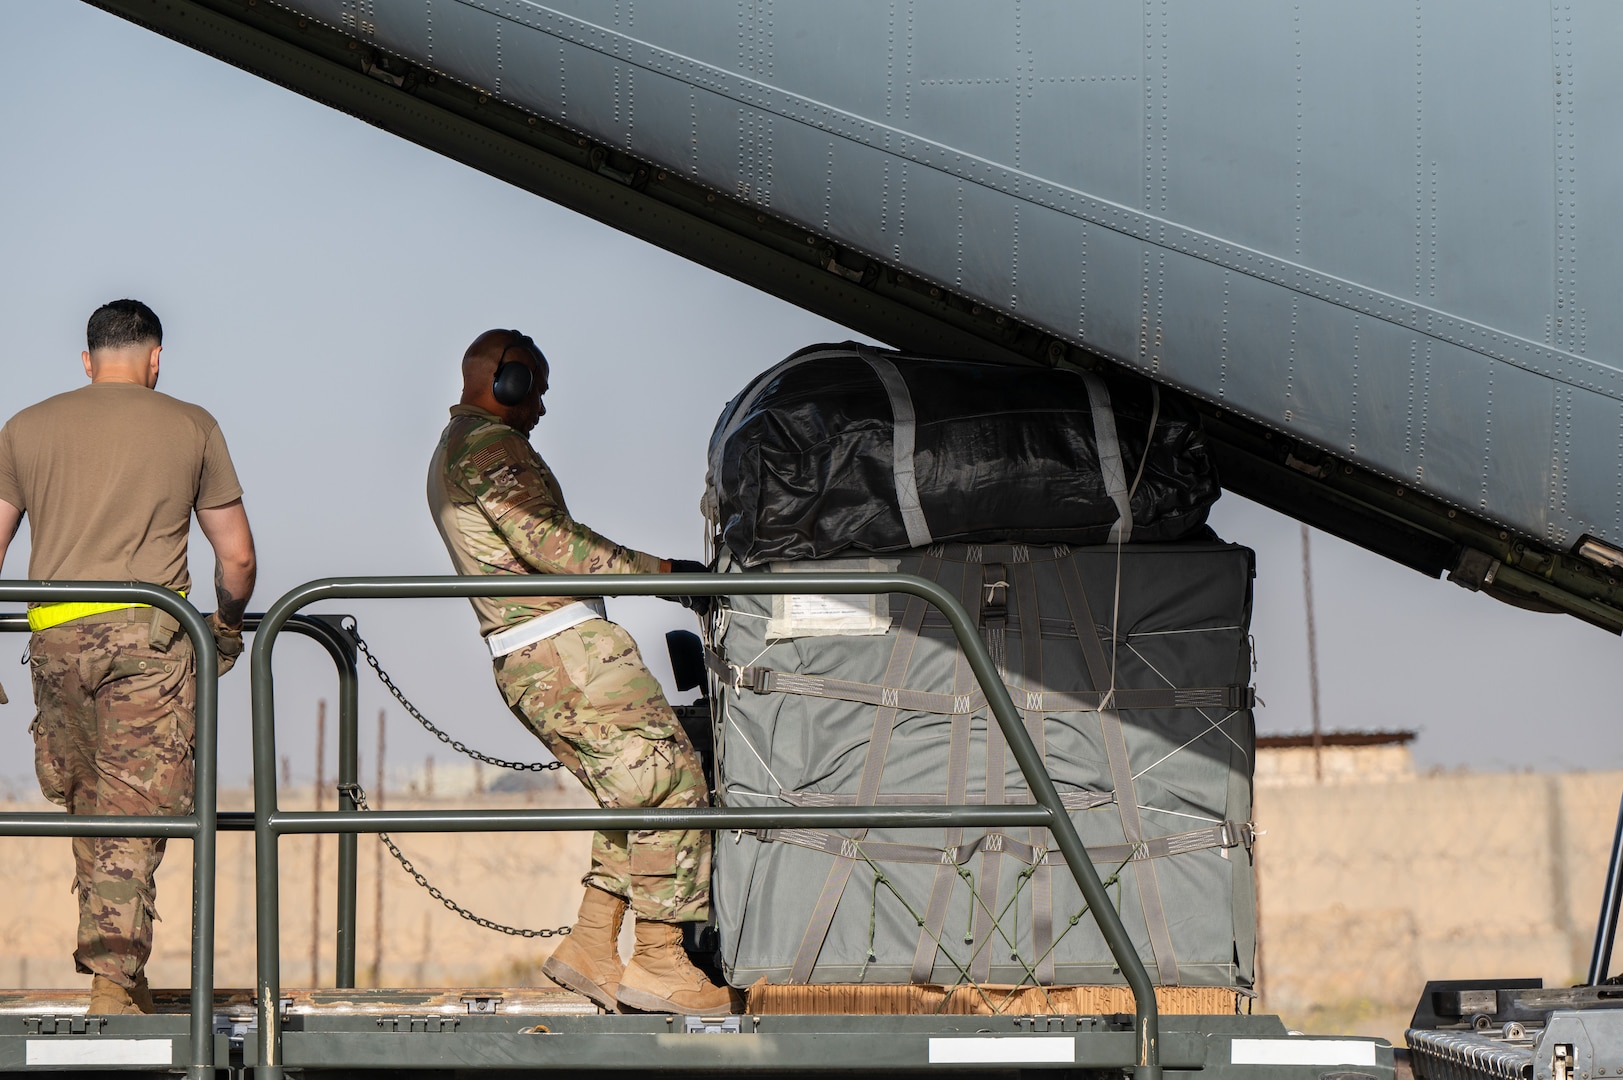 A U.S. Air Force port operations Airman loads pallets of humanitarian aid onto a C-130J Super Hercules at an undisclosed location within the U.S. Central Command area of responsibility, May 7, 2024. The U.S. Air Force’s rapid global mobility capability enables the expedited movement of critical, life-saving supplies to Gaza. (U.S. Air Force photo)